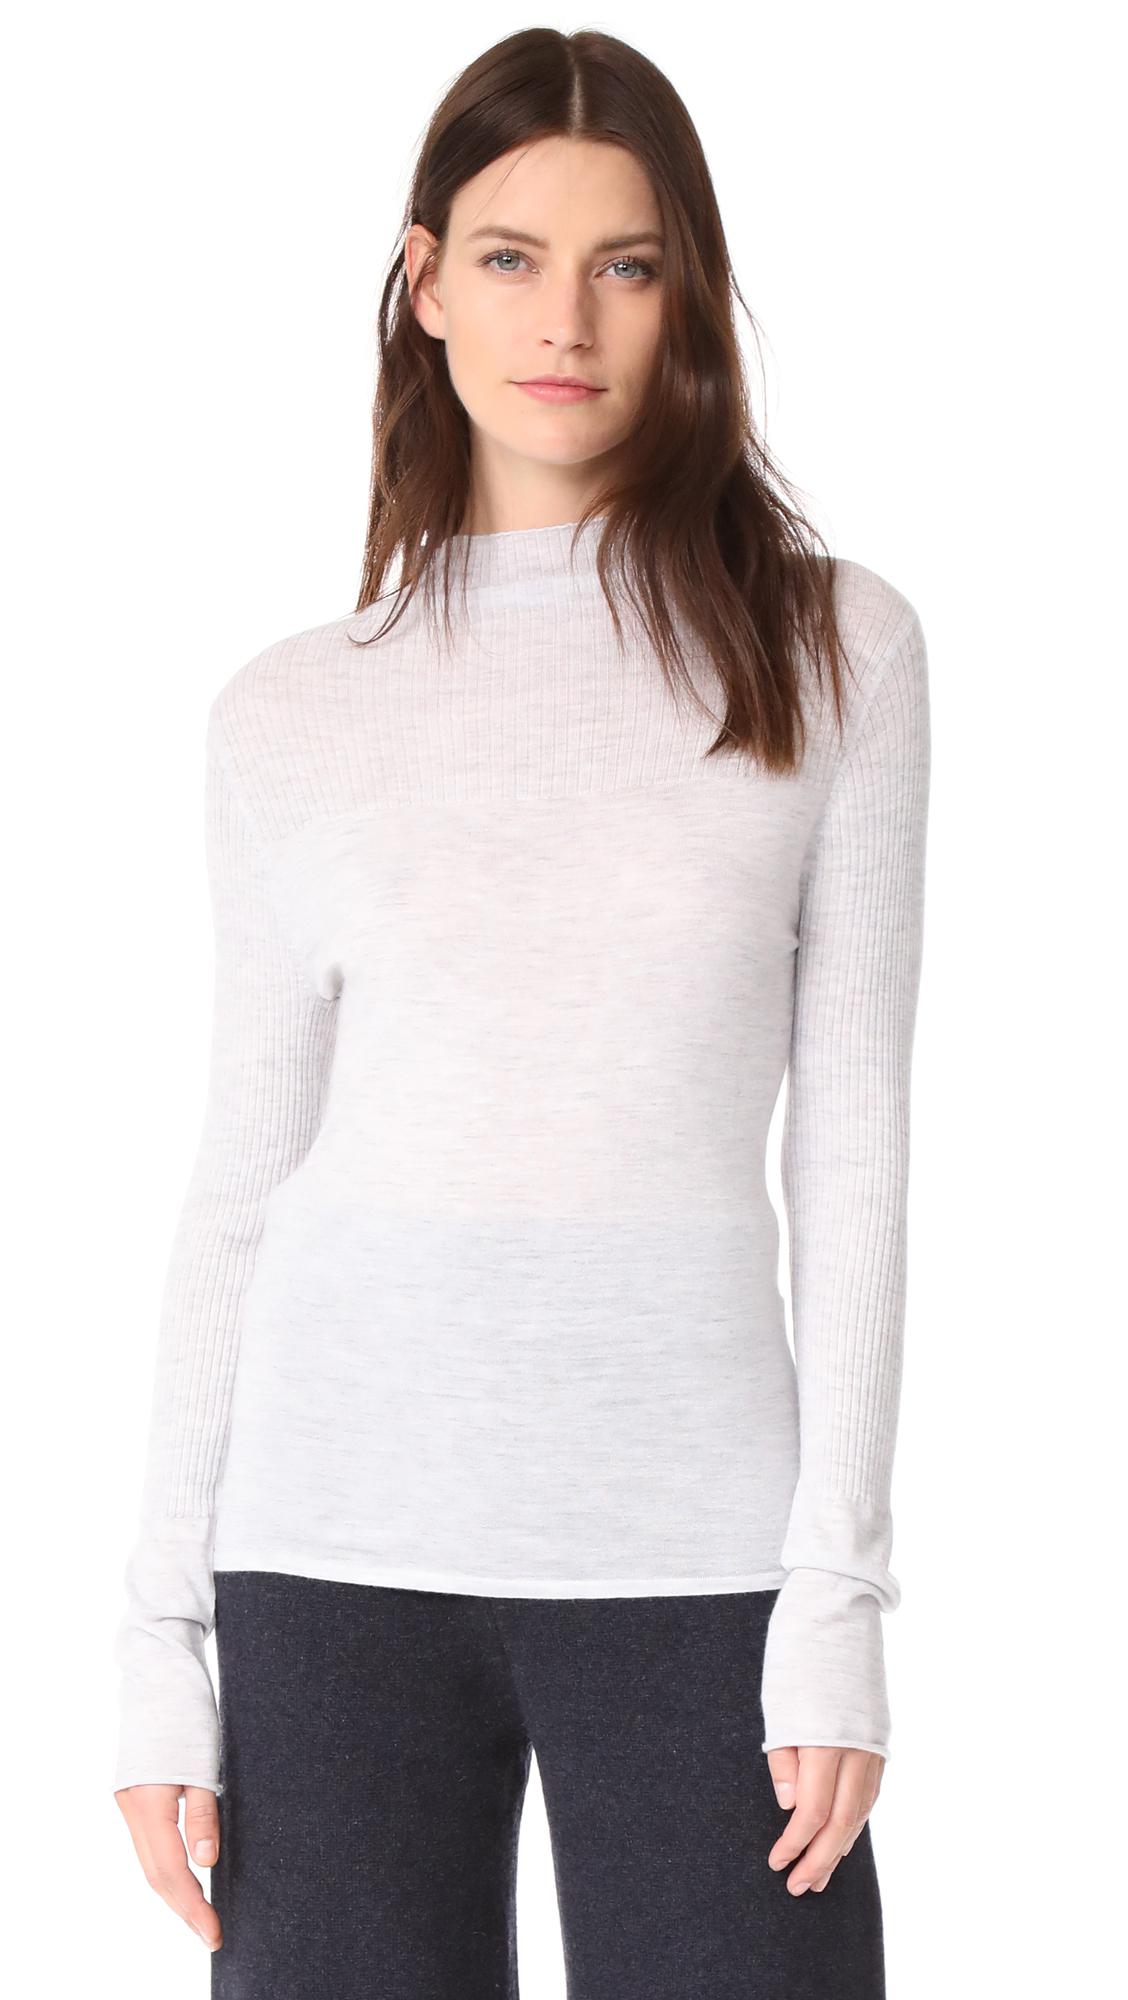 Lyst - Le Kasha Cashmere Mock Neck Sweater in Gray